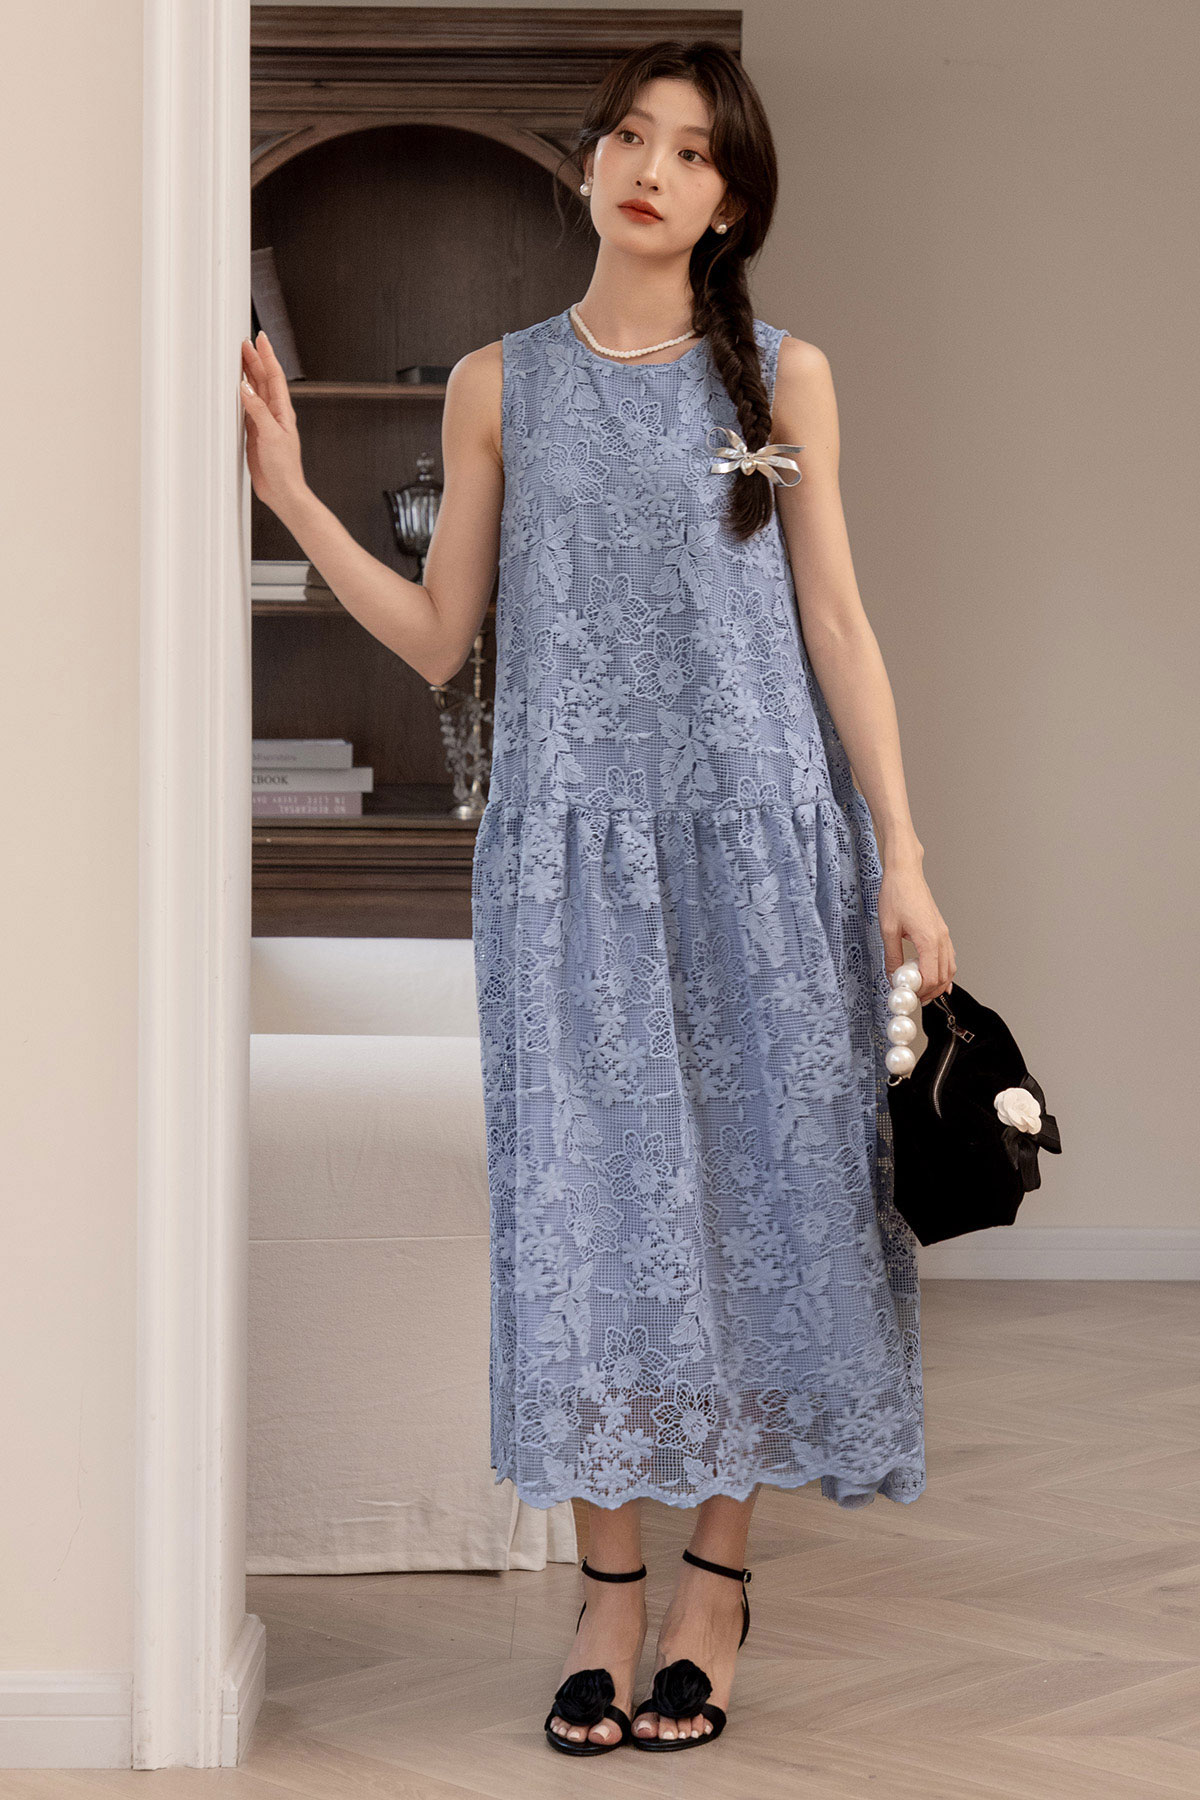 ABELLE DRESS - DEWDROP [BY MODPARADE]